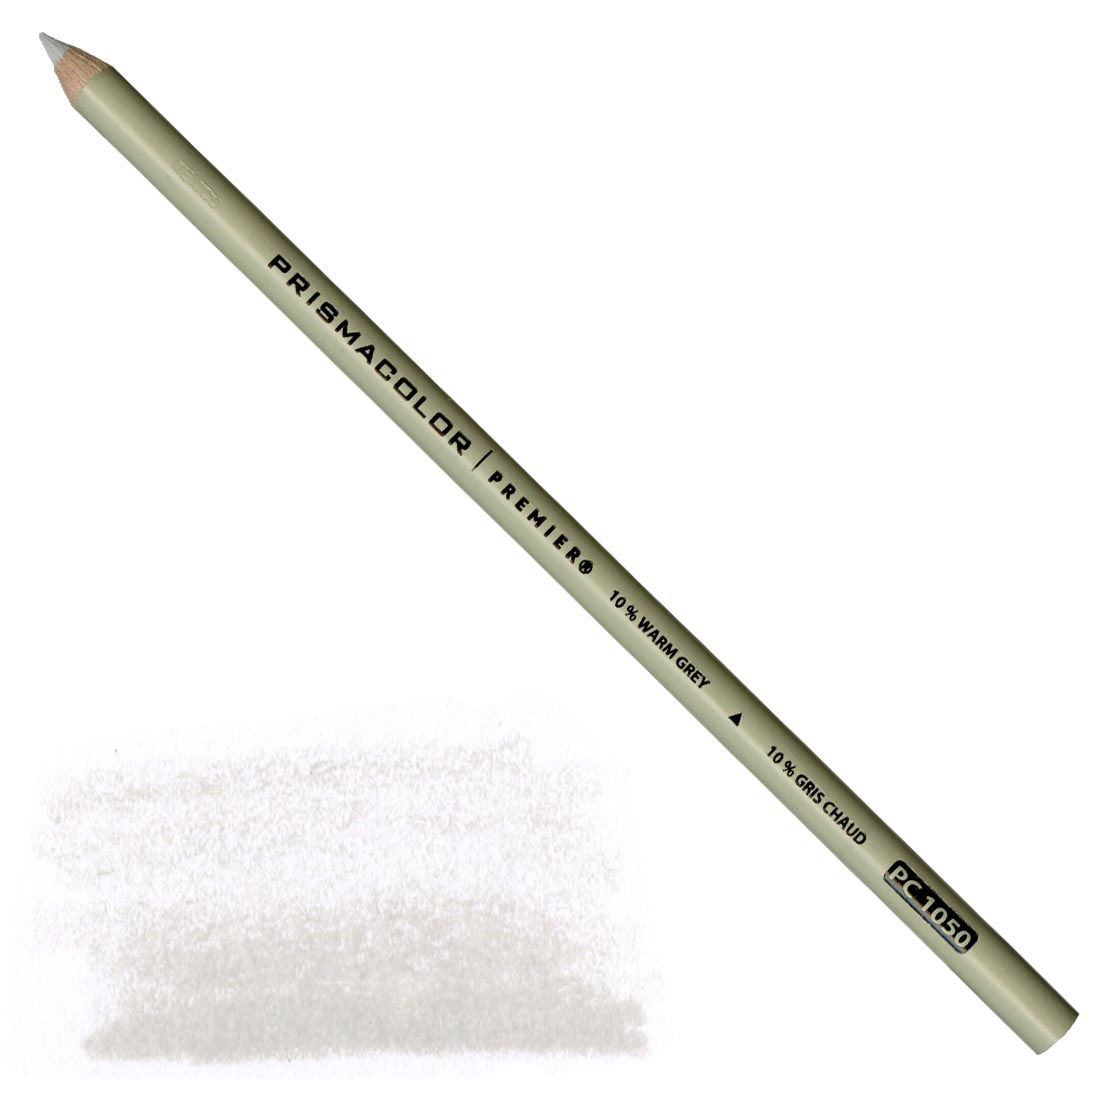 10% Warm Grey Prismacolor Premier Colored Pencil with a sample colored swatch